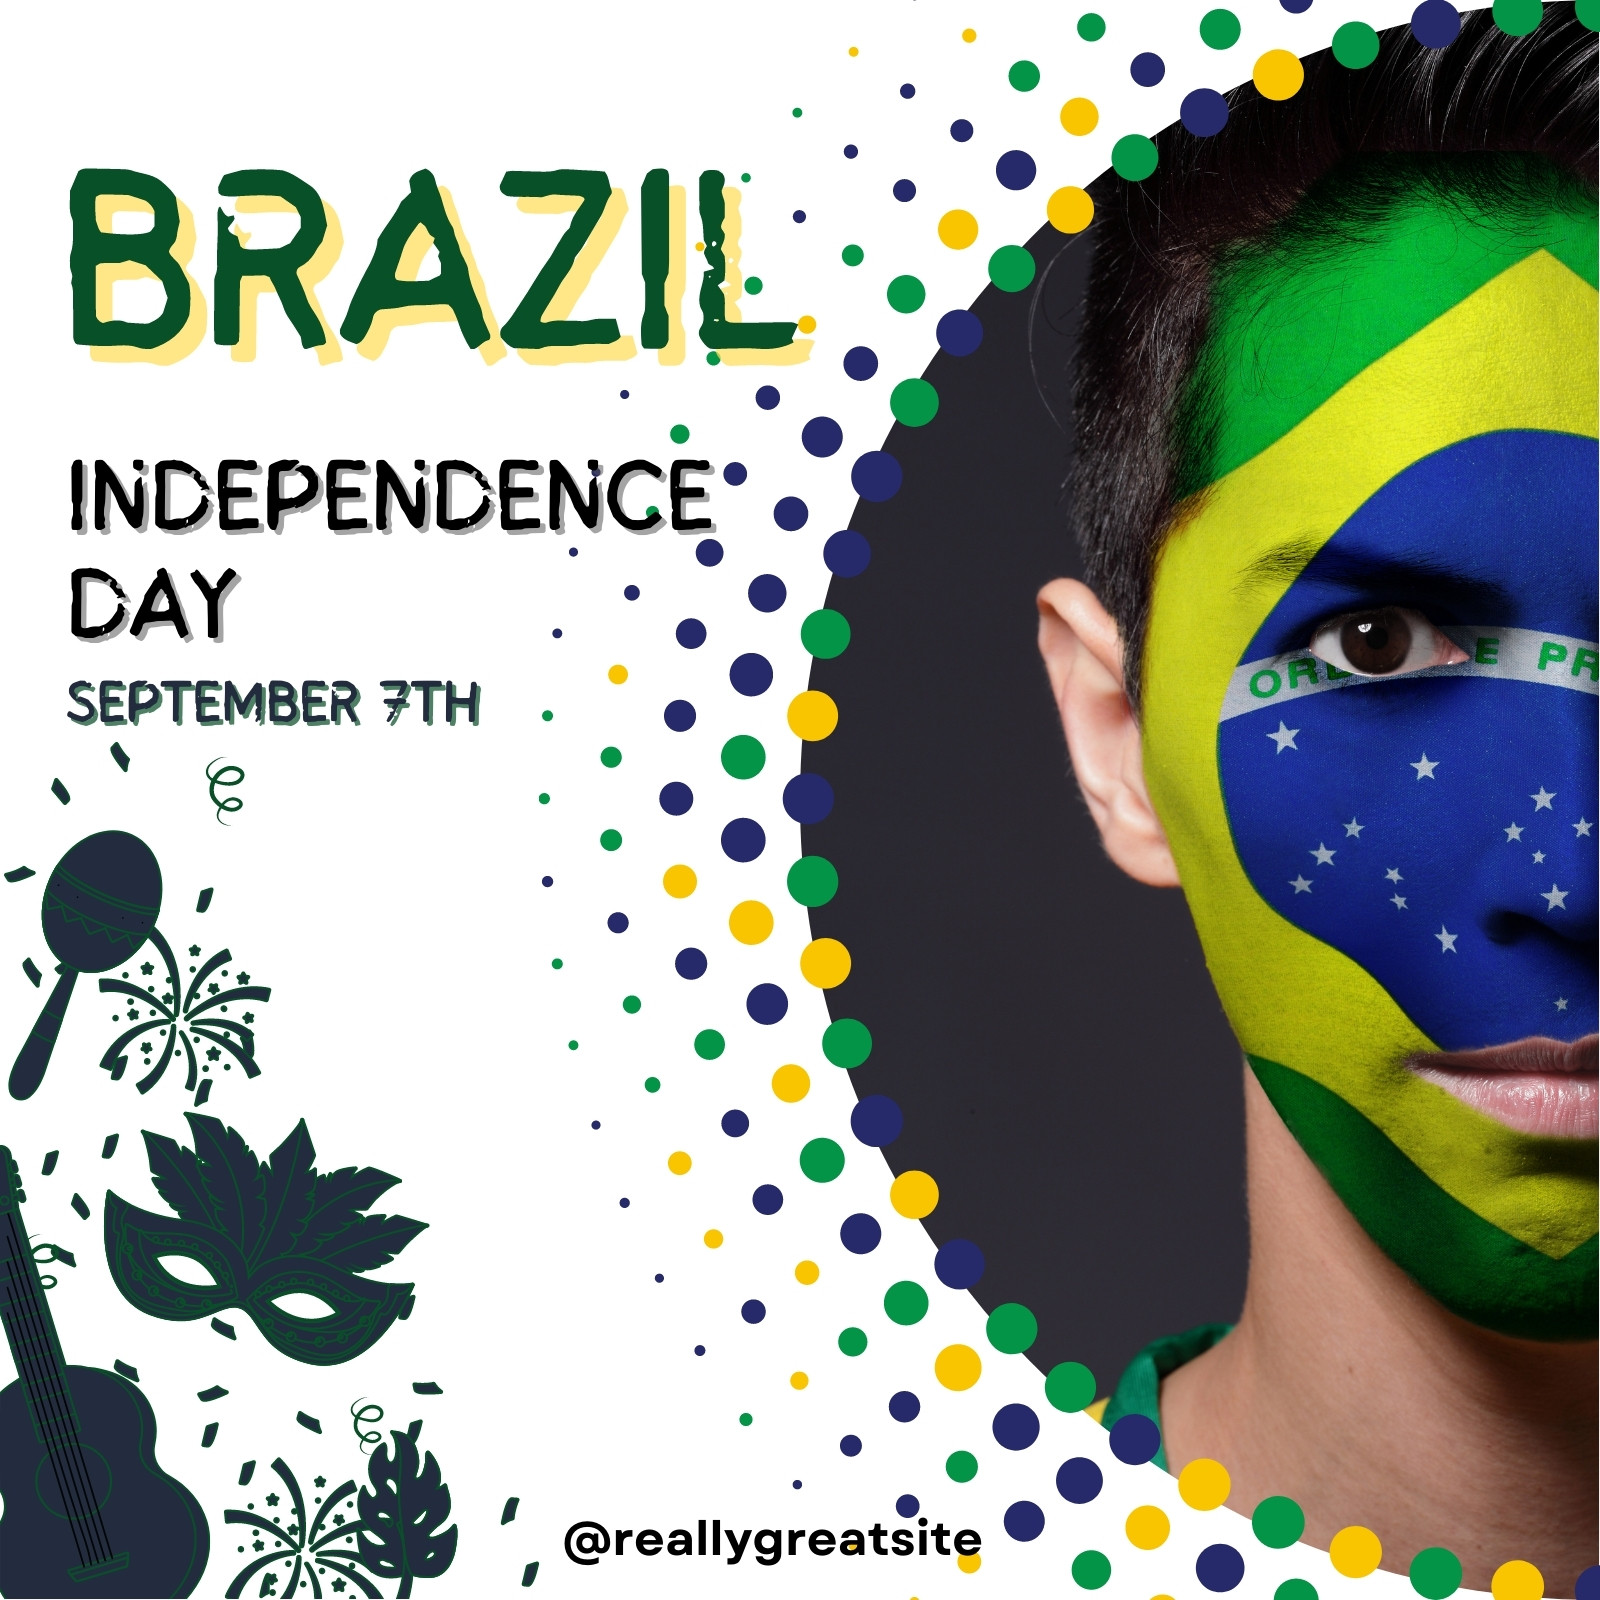 Brazil independence day social media post Template